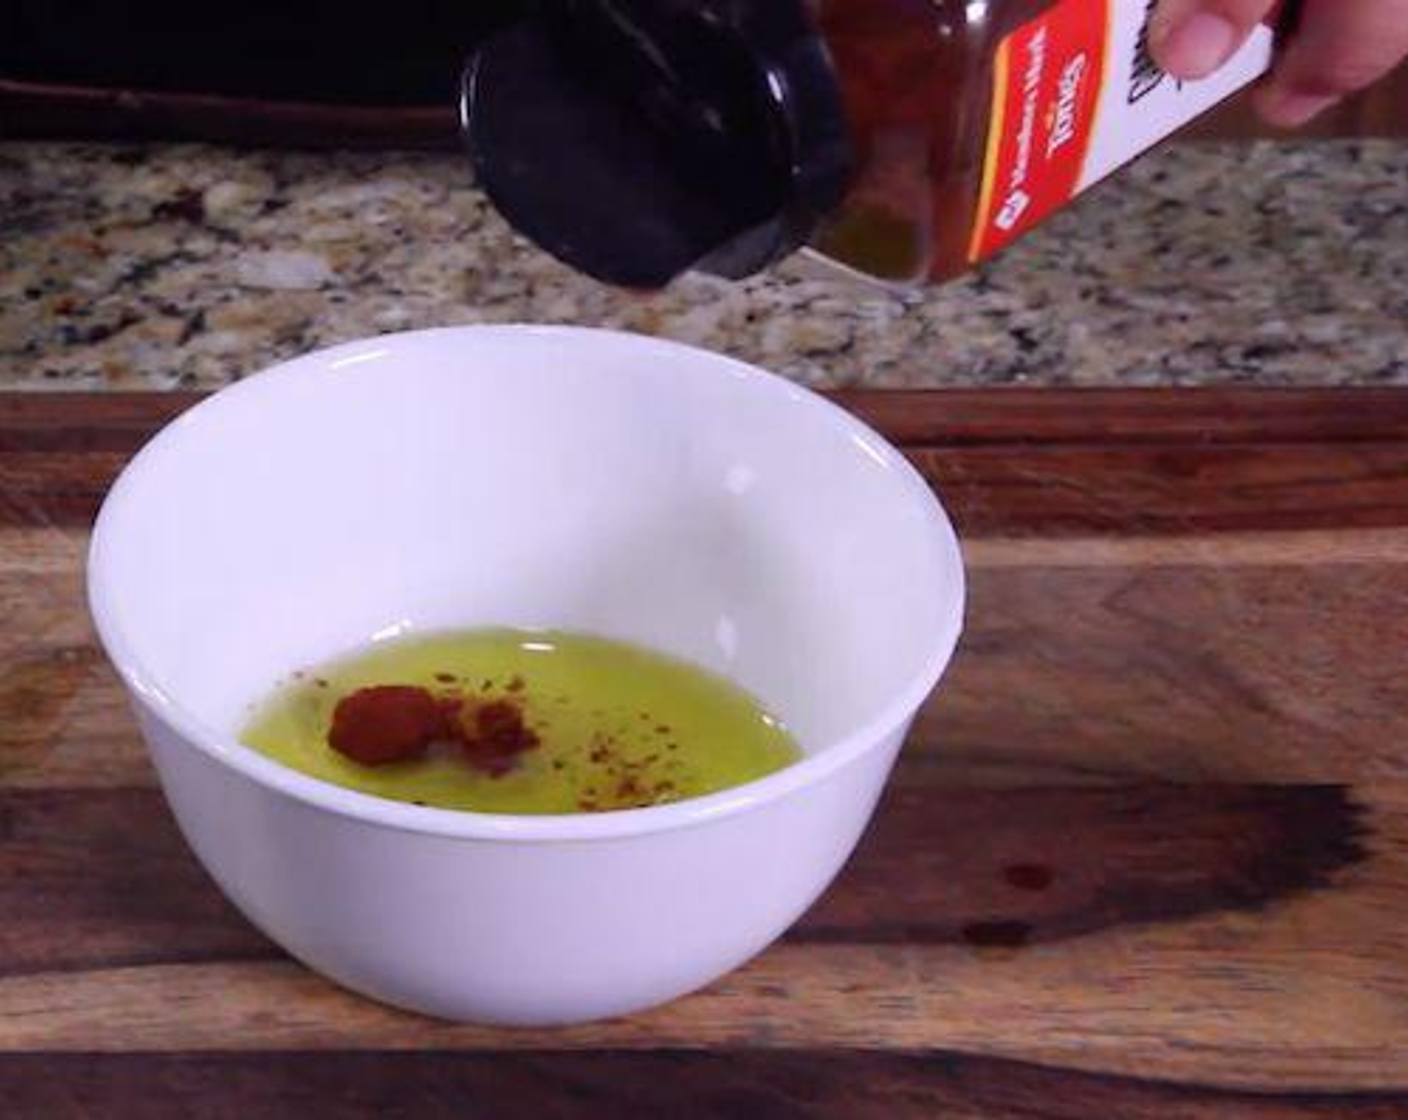 step 1 In a medium shallow bowl, whisk together Extra-Virgin Olive Oil (3 Tbsp), juice from a Lime (1), Chili Powder (1/2 Tbsp), Ground Cumin (1/2 tsp) and Cayenne Pepper (1/2 tsp).